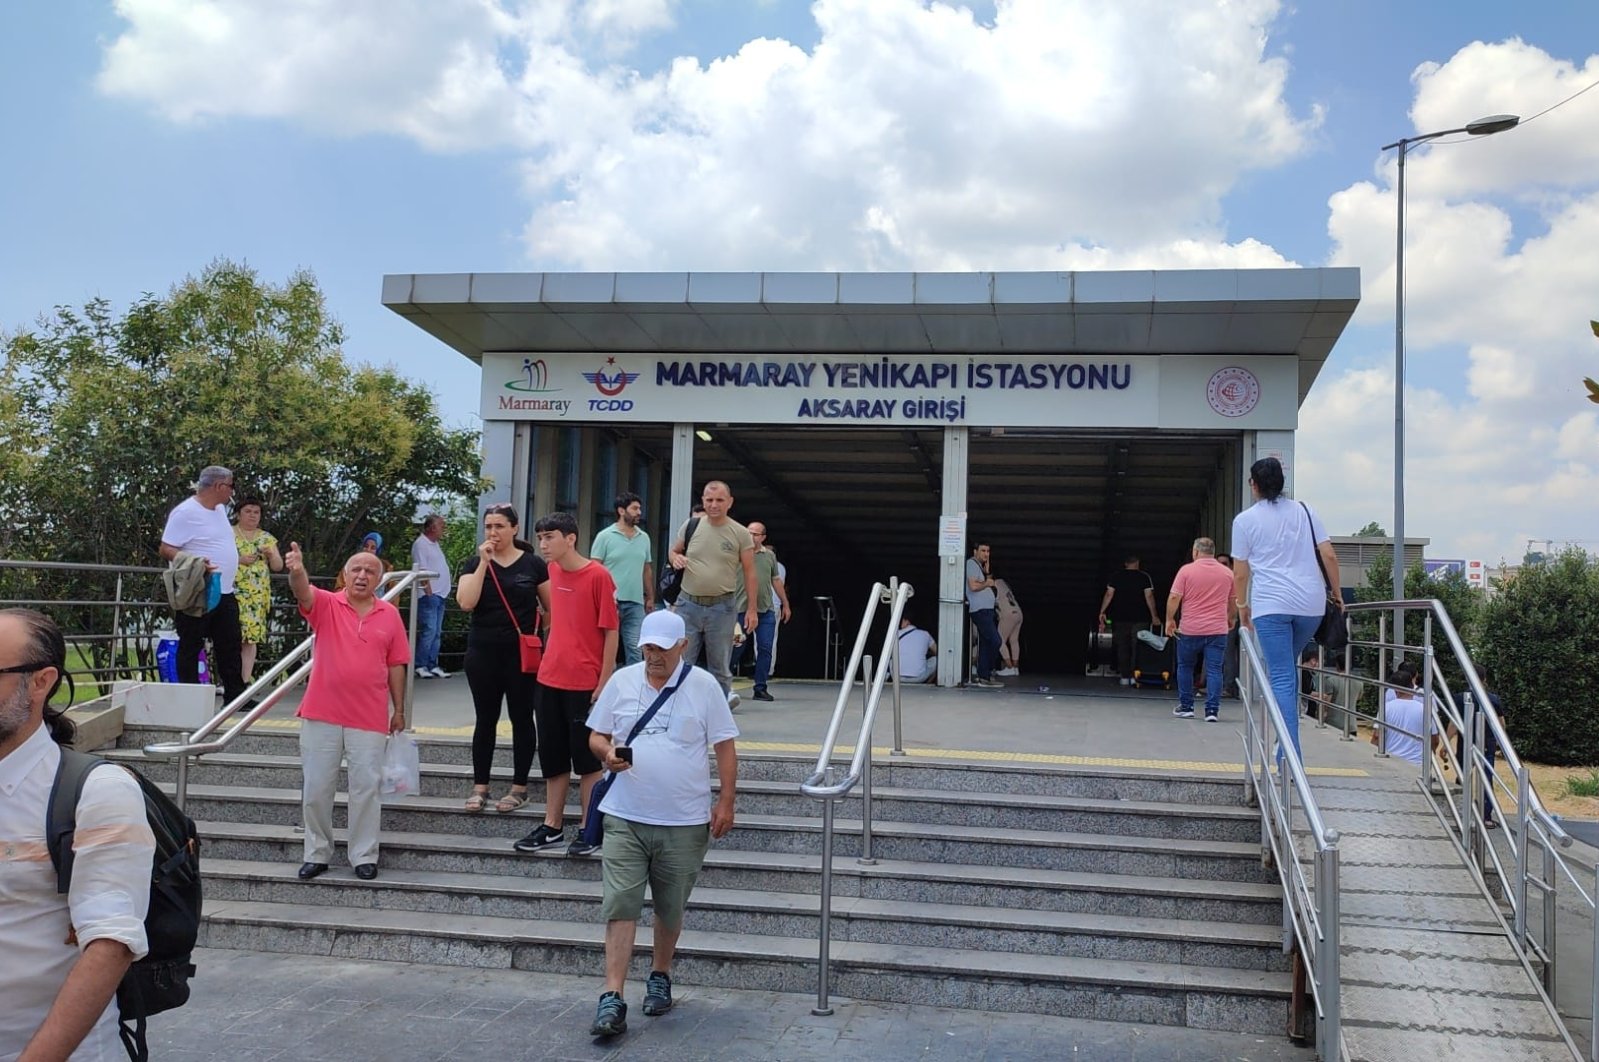 Citizens are seen outside a Marmaray station in Aksaray, Istanbul, Türkiye, July 27, 2023. (DHA Photo)